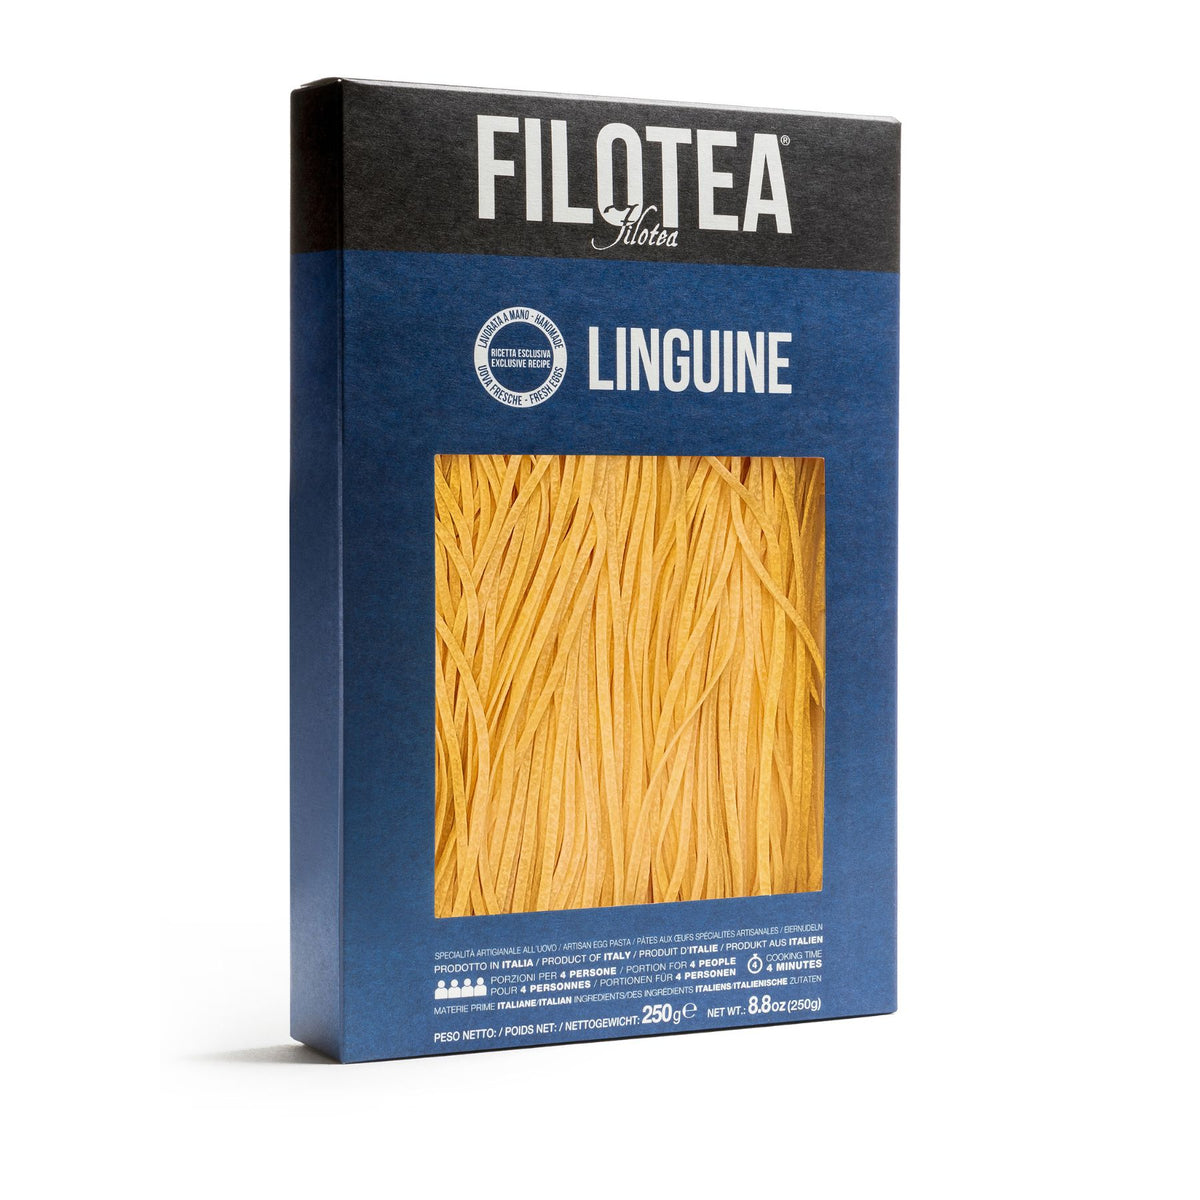 Filotea Linguine Artisan Egg Pasta 250g | Imported and distributed in the UK by Just Gourmet Foods